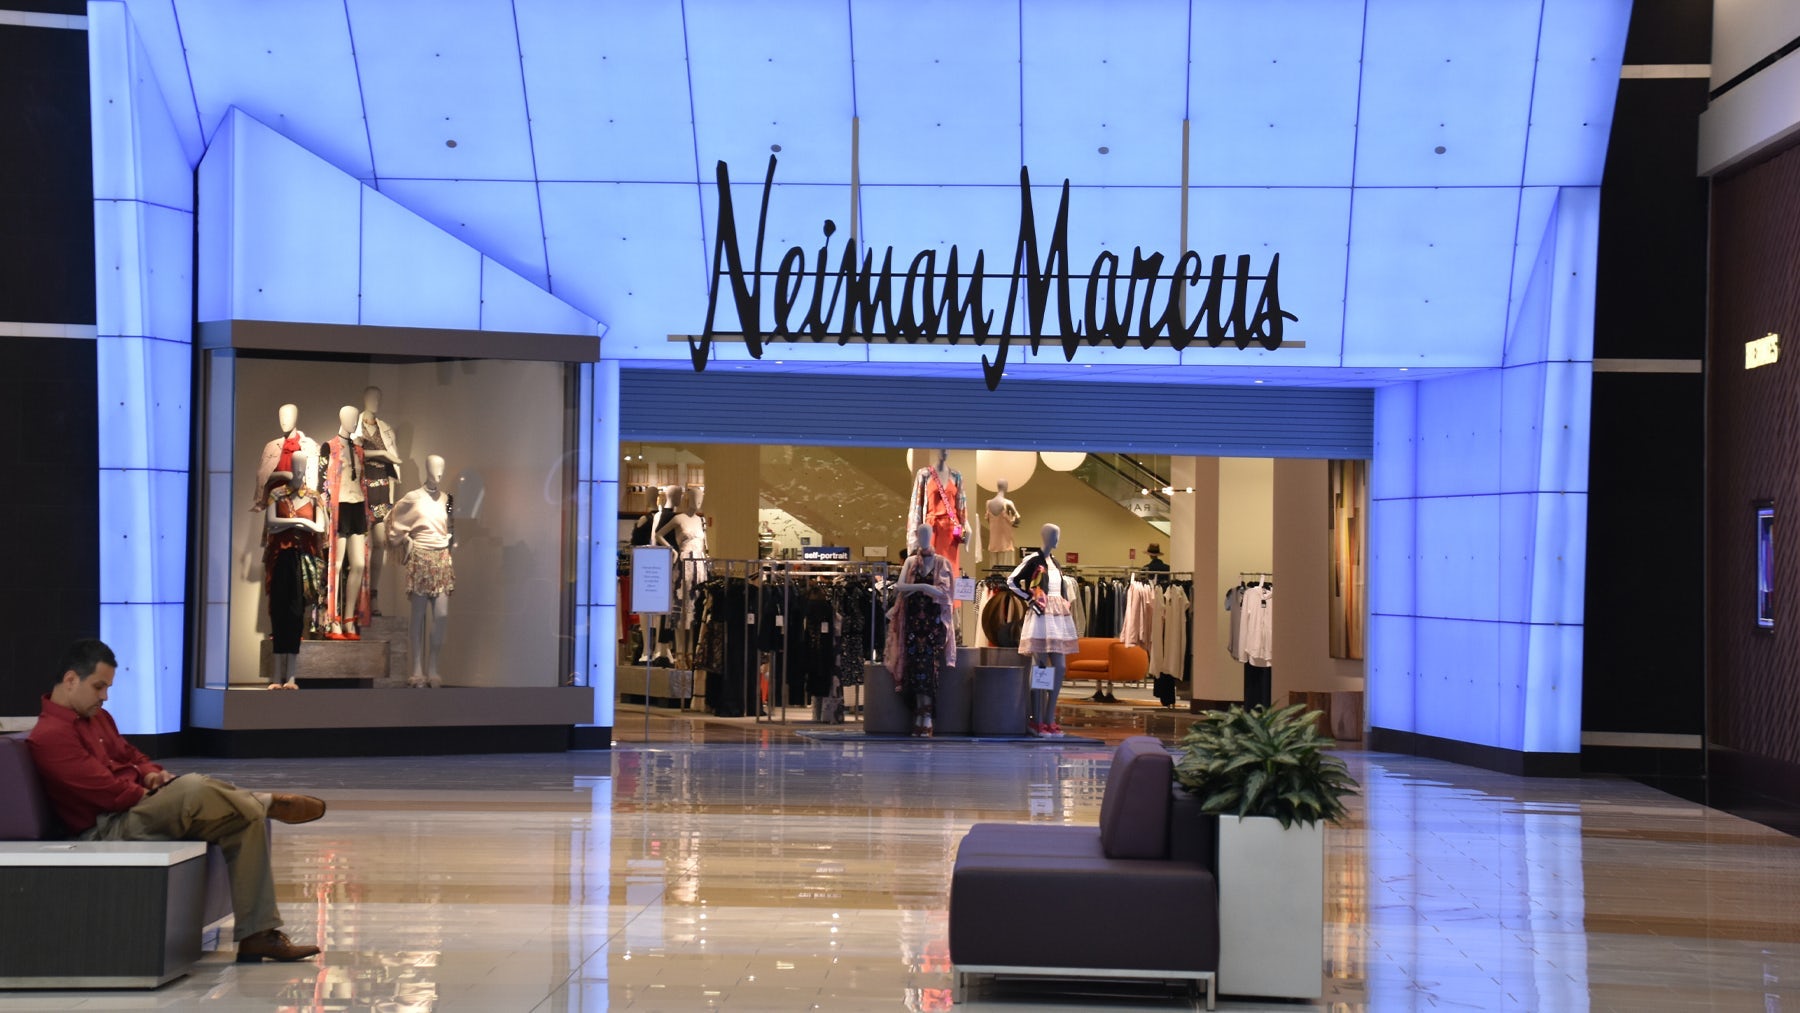 Neiman Marcus on the brink of bankruptcy